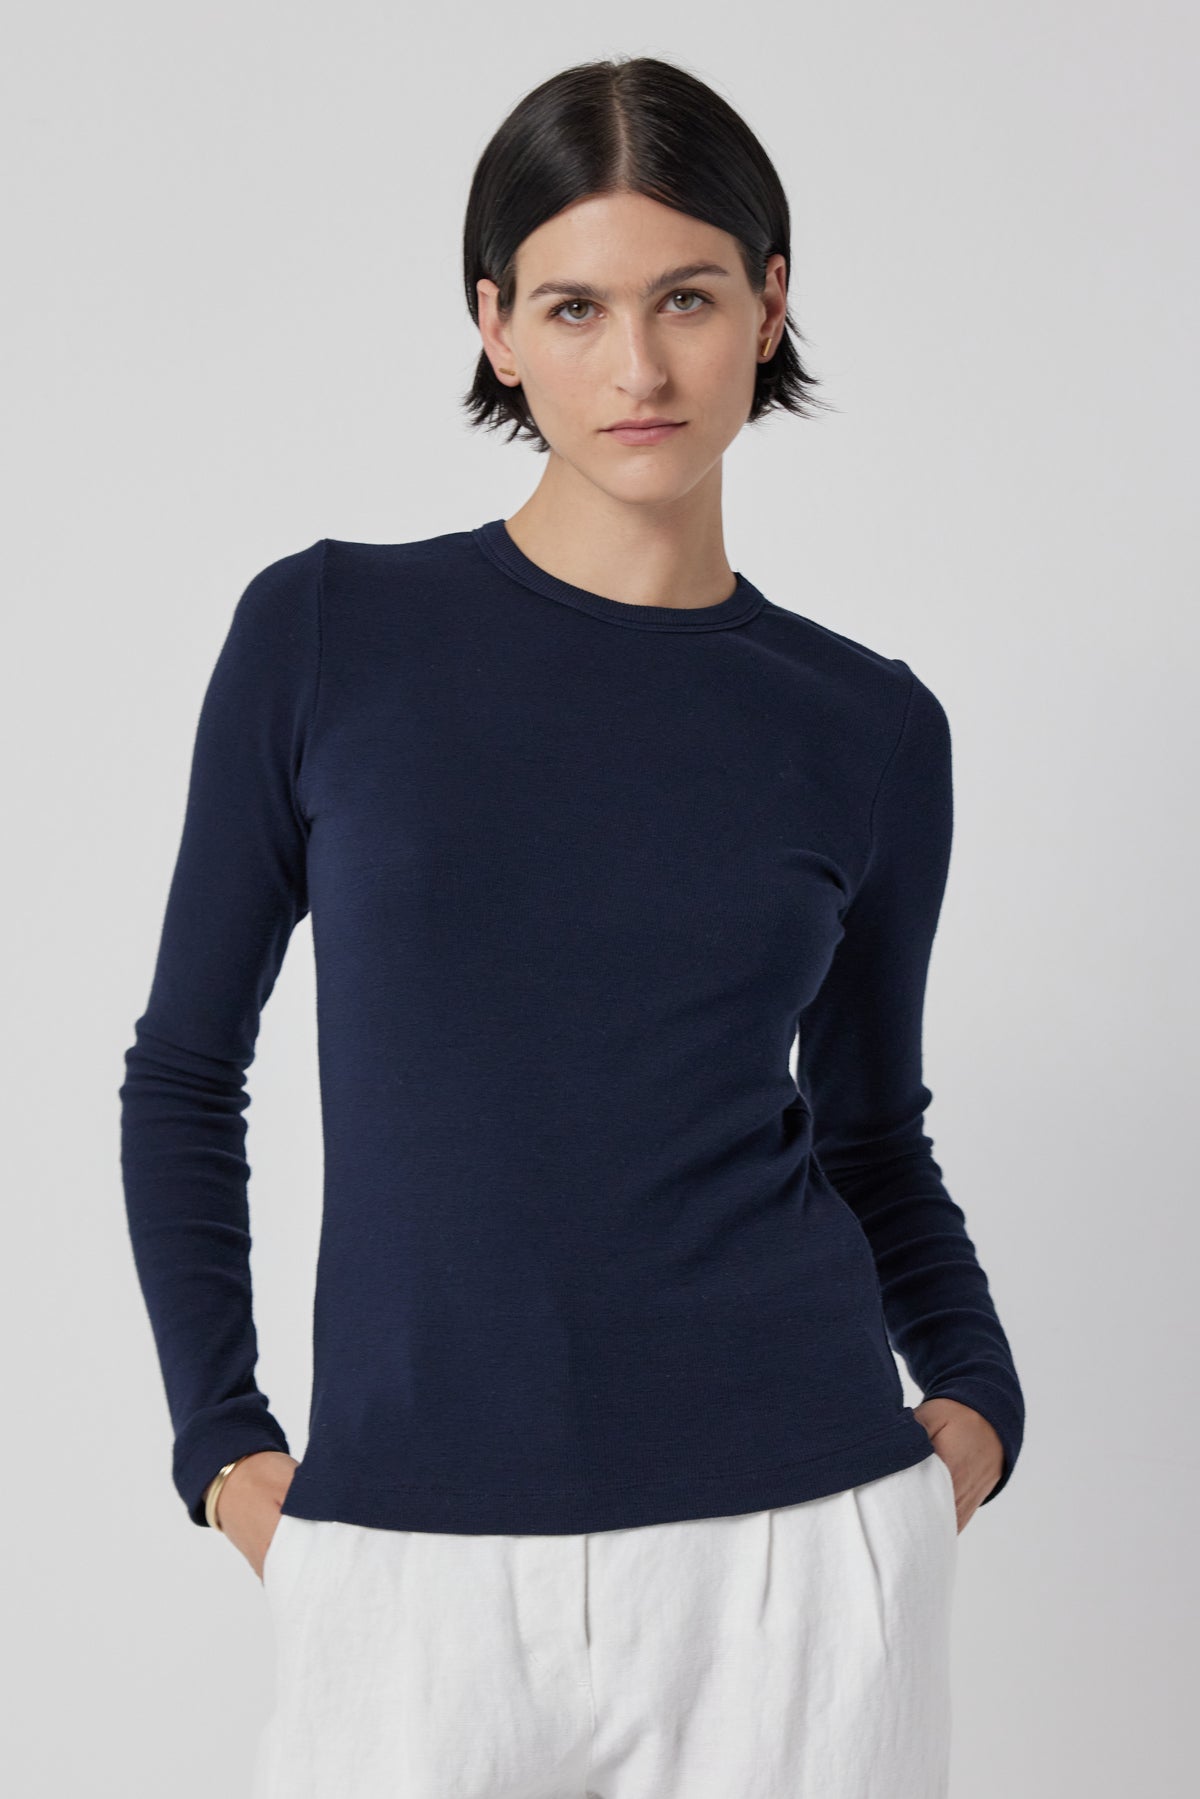   Woman wearing a slimmer fit navy blue long-sleeve CAMINO TEE by Velvet by Jenny Graham and white pants. 